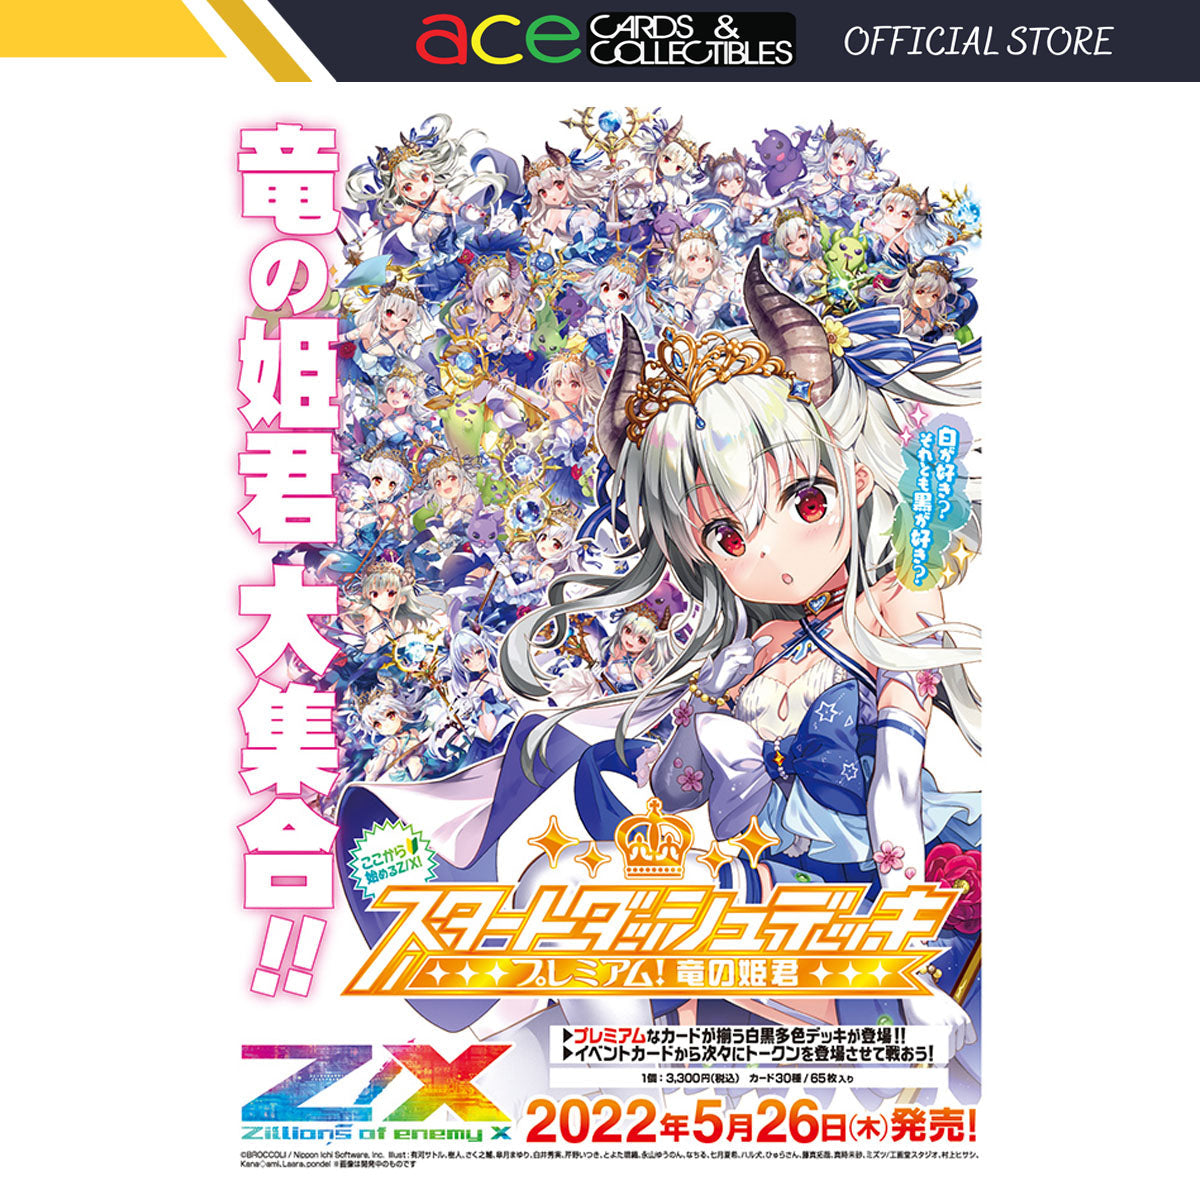 Z/X -Zillions of enemy X- Starter Premium Princess Dragon [ZX-SD-06] (Japanese)-Broccoli-Ace Cards & Collectibles